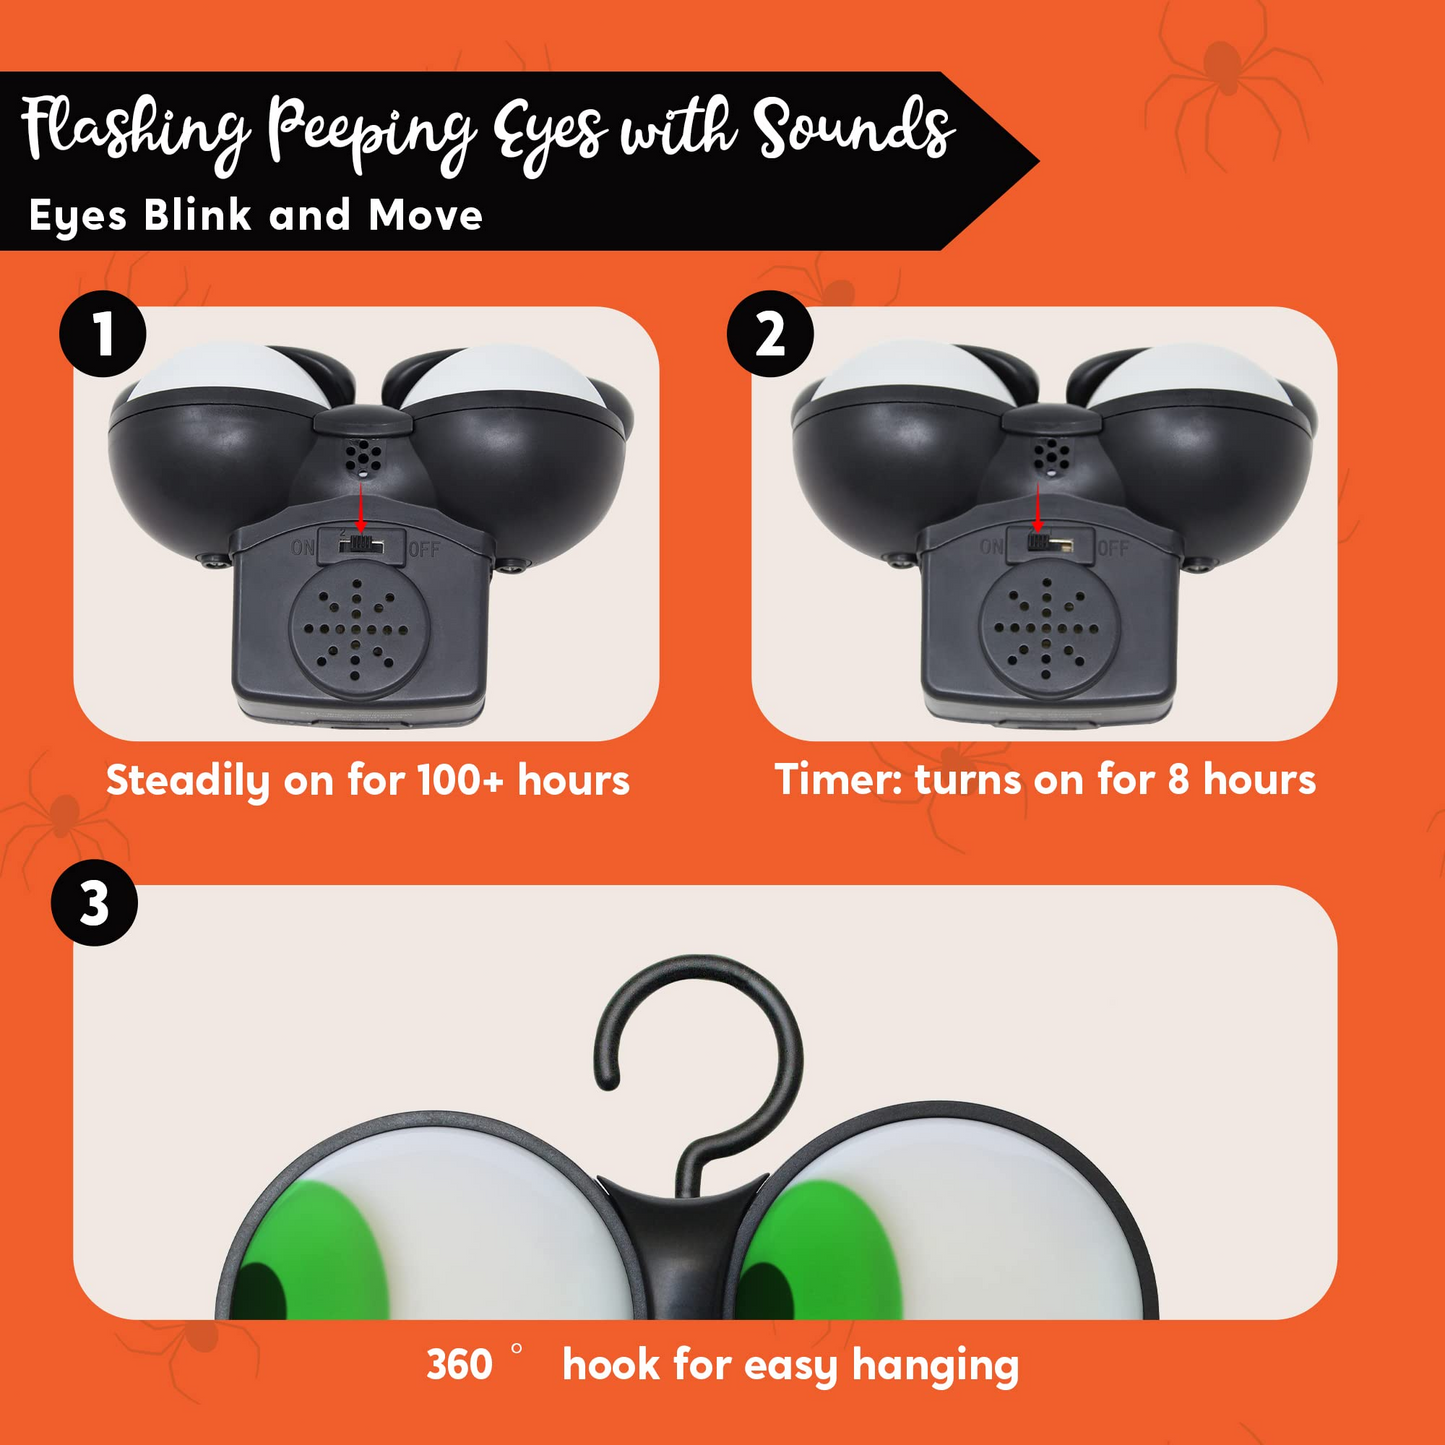 Halloween Flashing Peeping Eyes Lights (3 Pack); Sound-activated